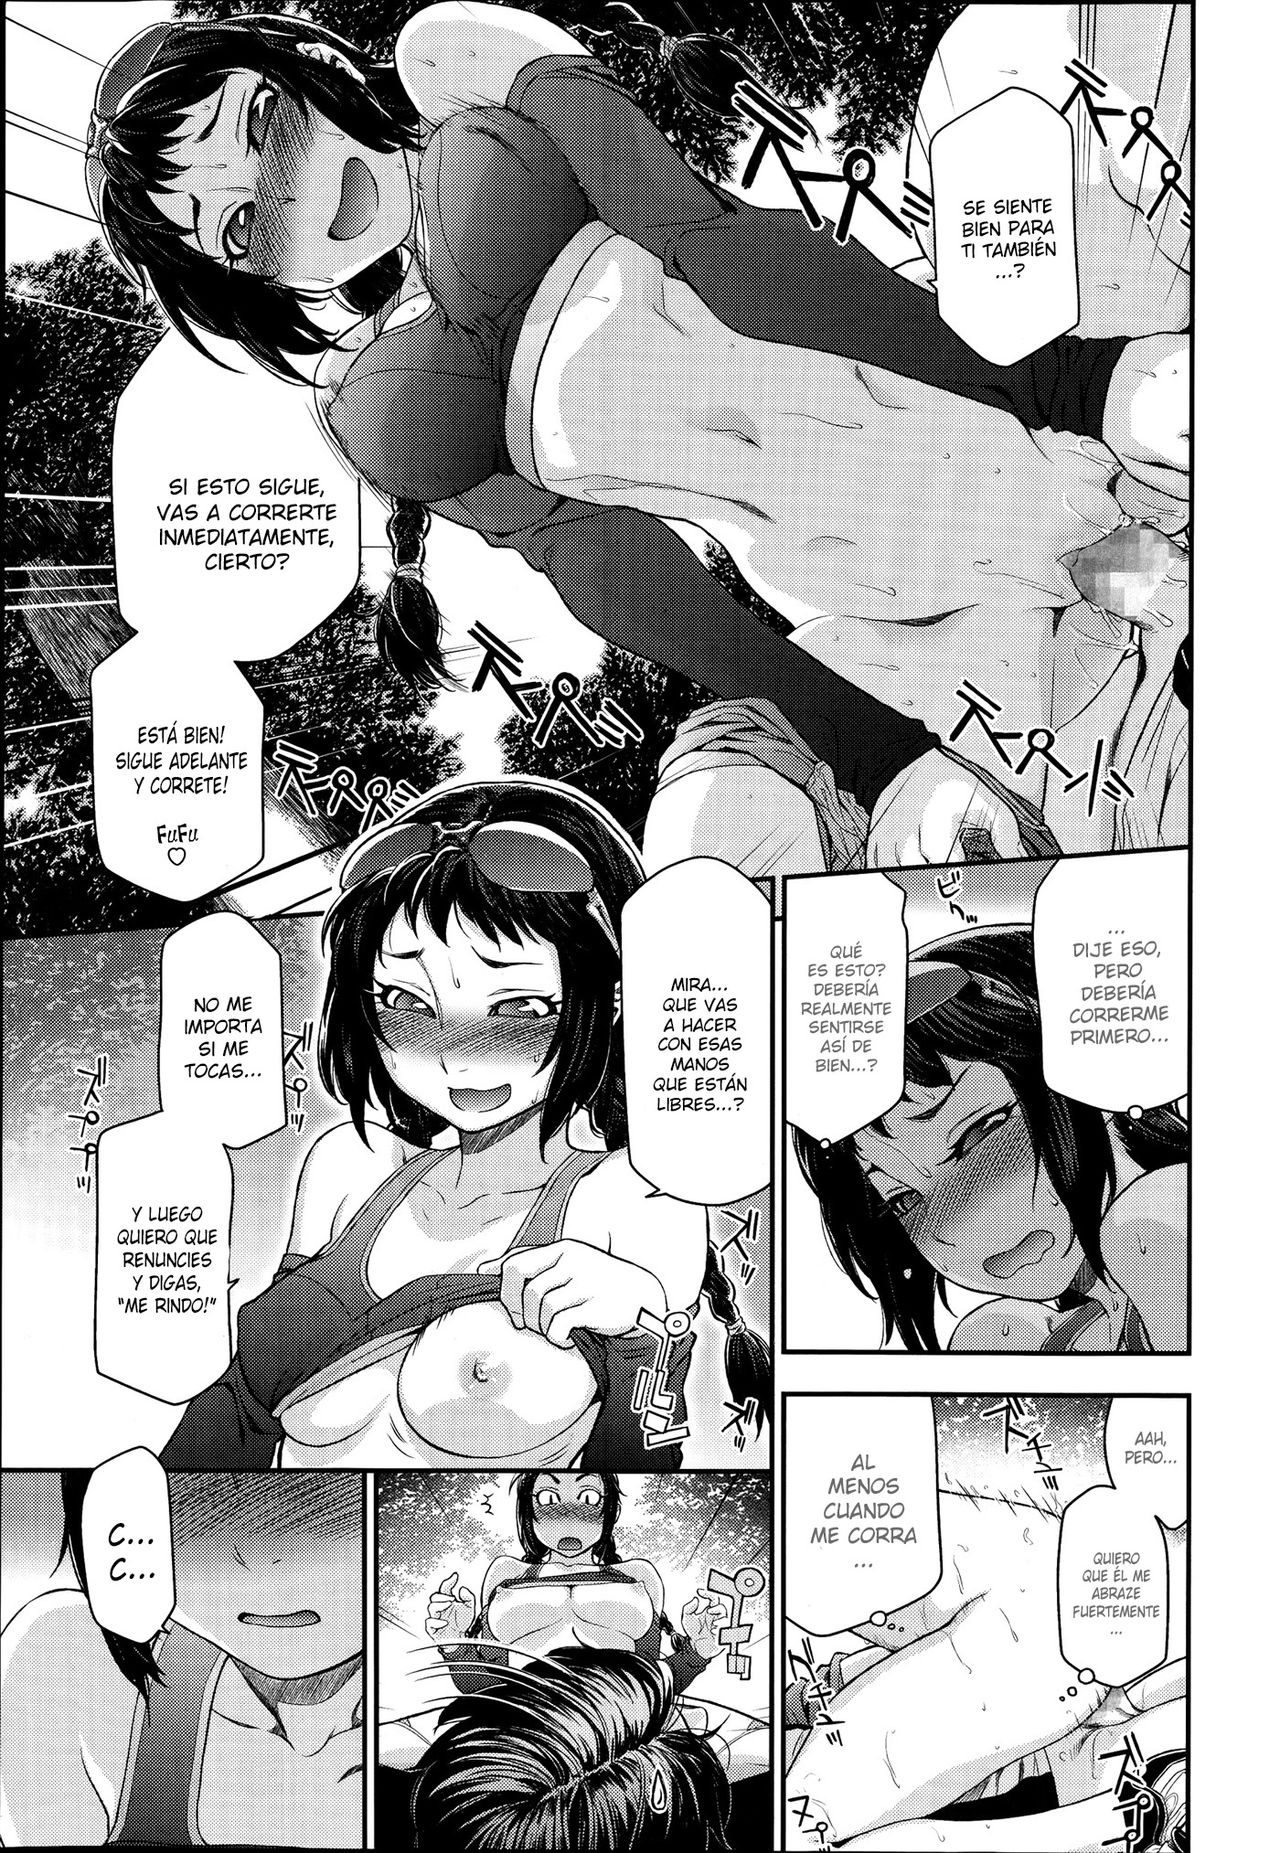 [Yamatogawa] Touch Me If You Can! | Tocame Si puedes! (COMIC Tenma 2014-09) [Spanish] [XHentai95] [大和川] タッチ・ミー・イフ・ユー・キャン！ (COMIC 天魔 2014年9月号) [スペイン翻訳]